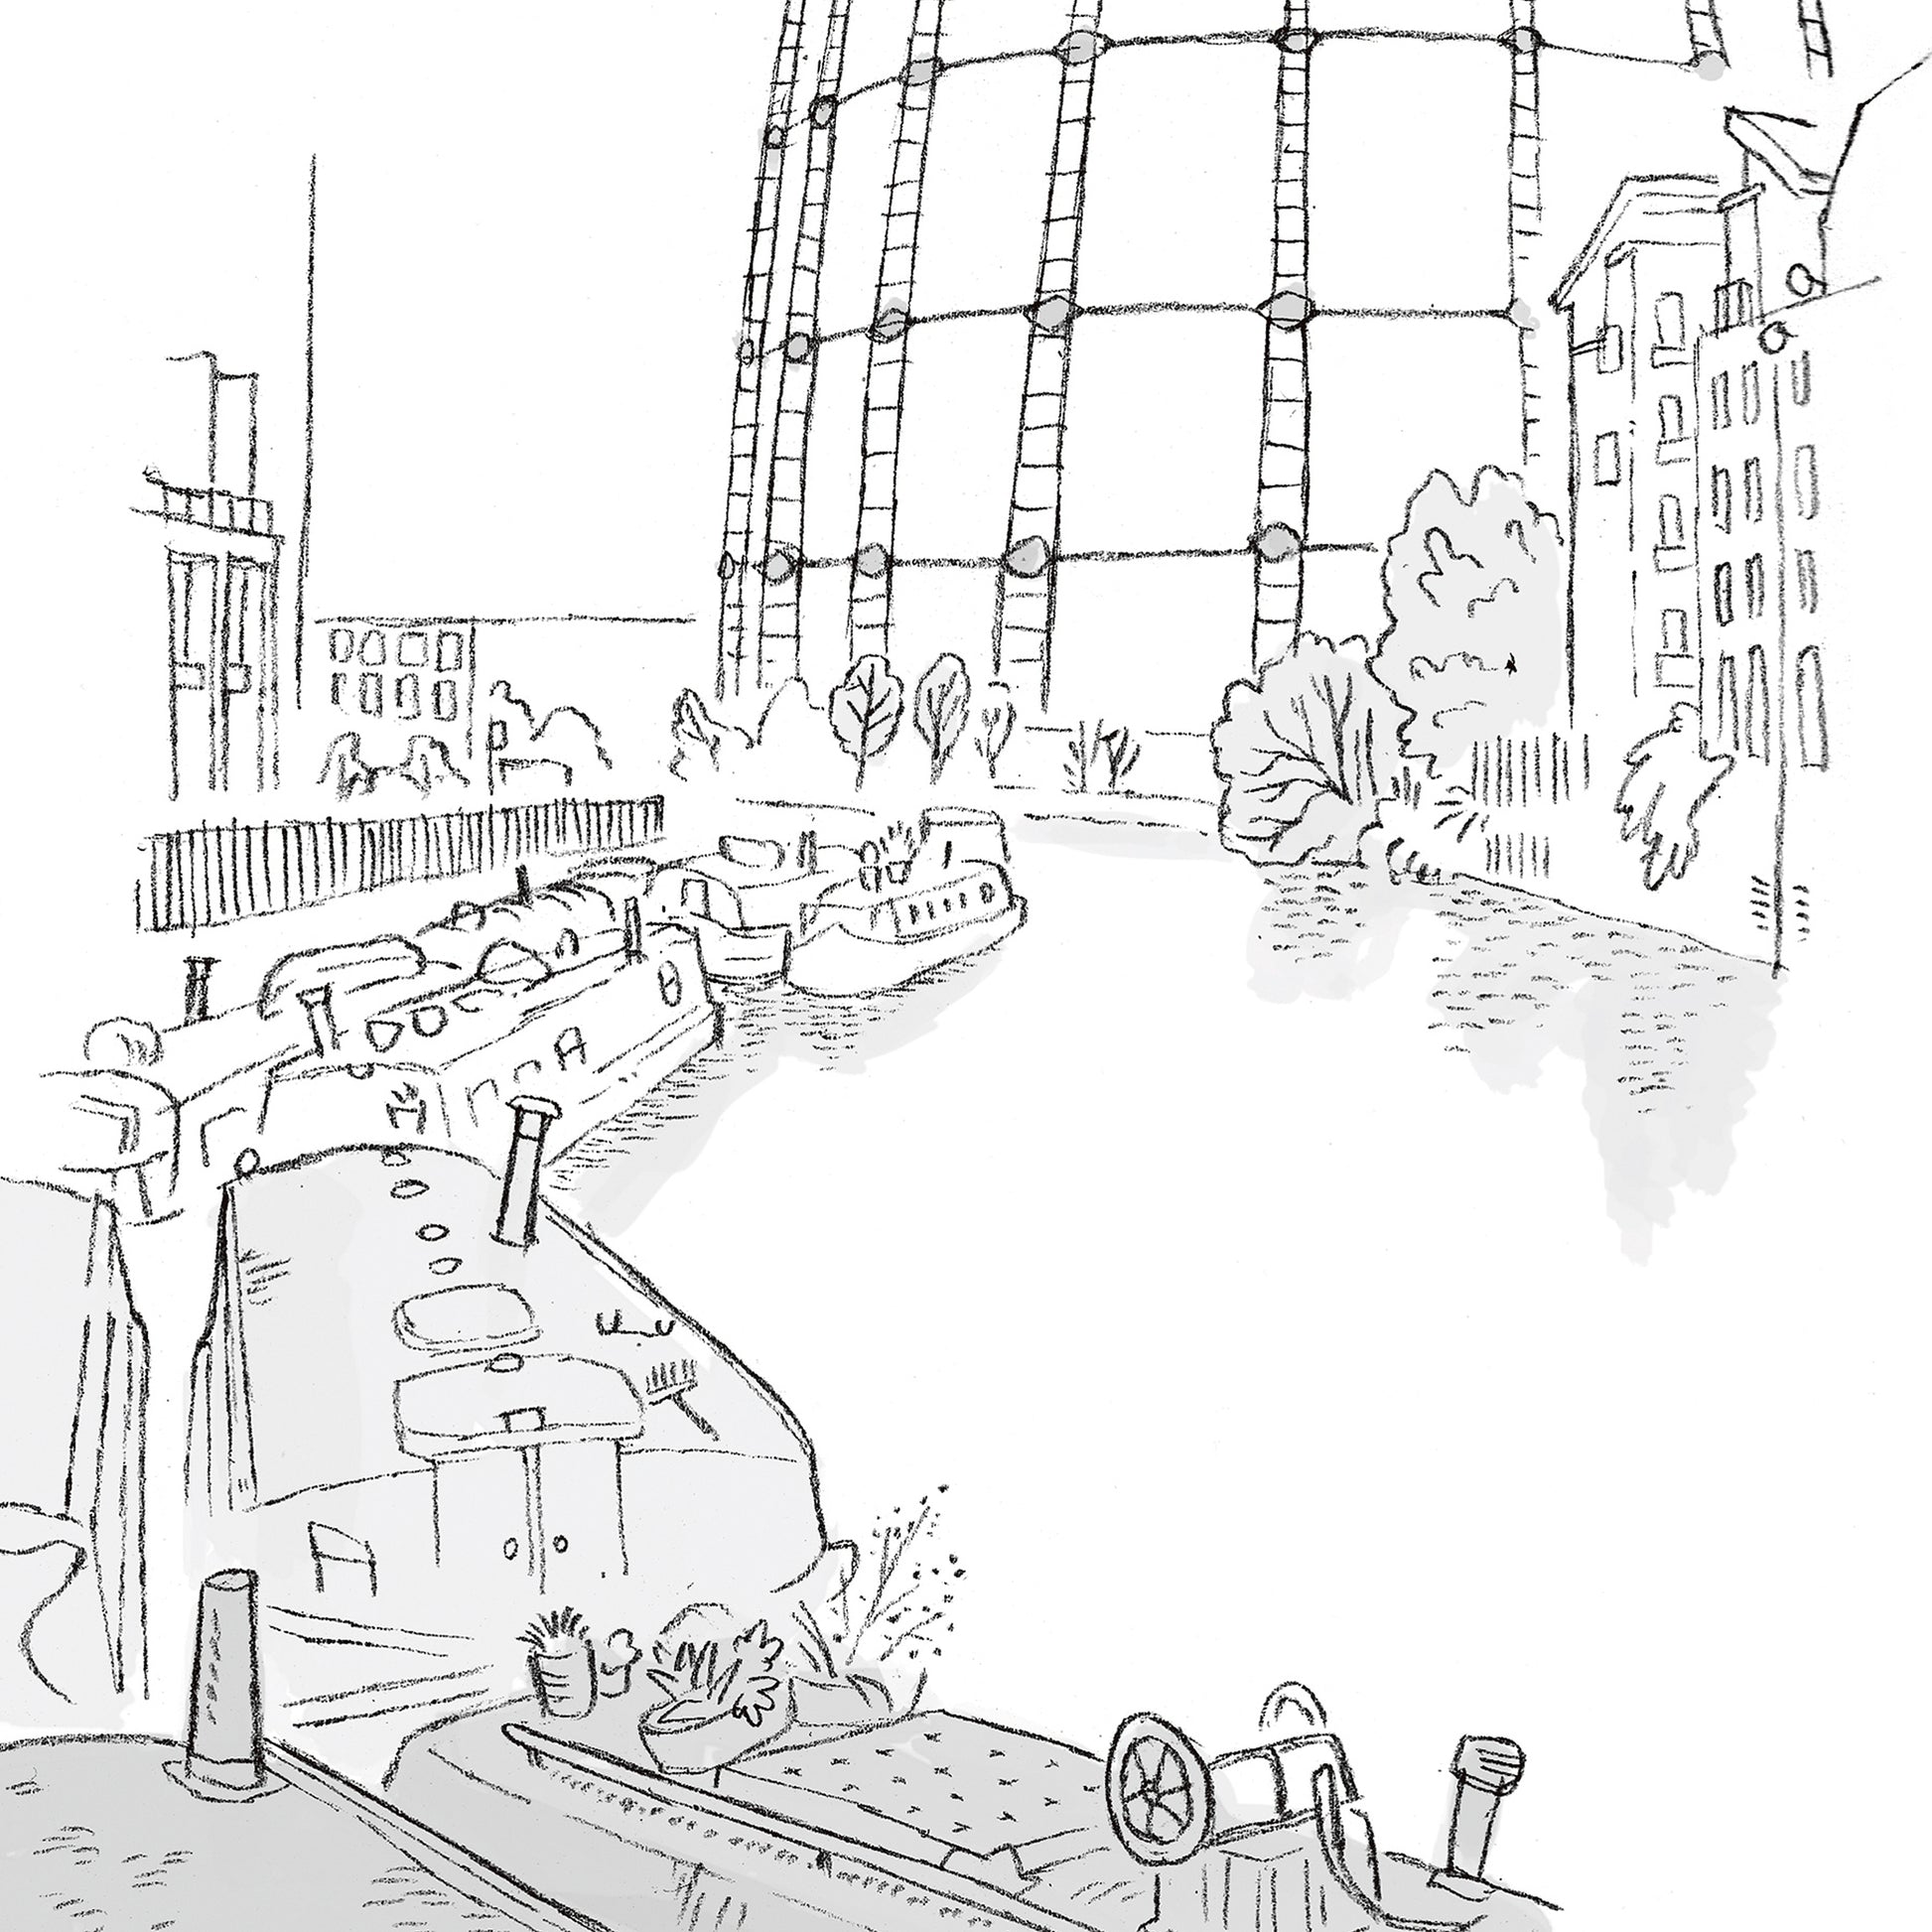 Detail from sketch of London regents canal sketch by Mike Green.